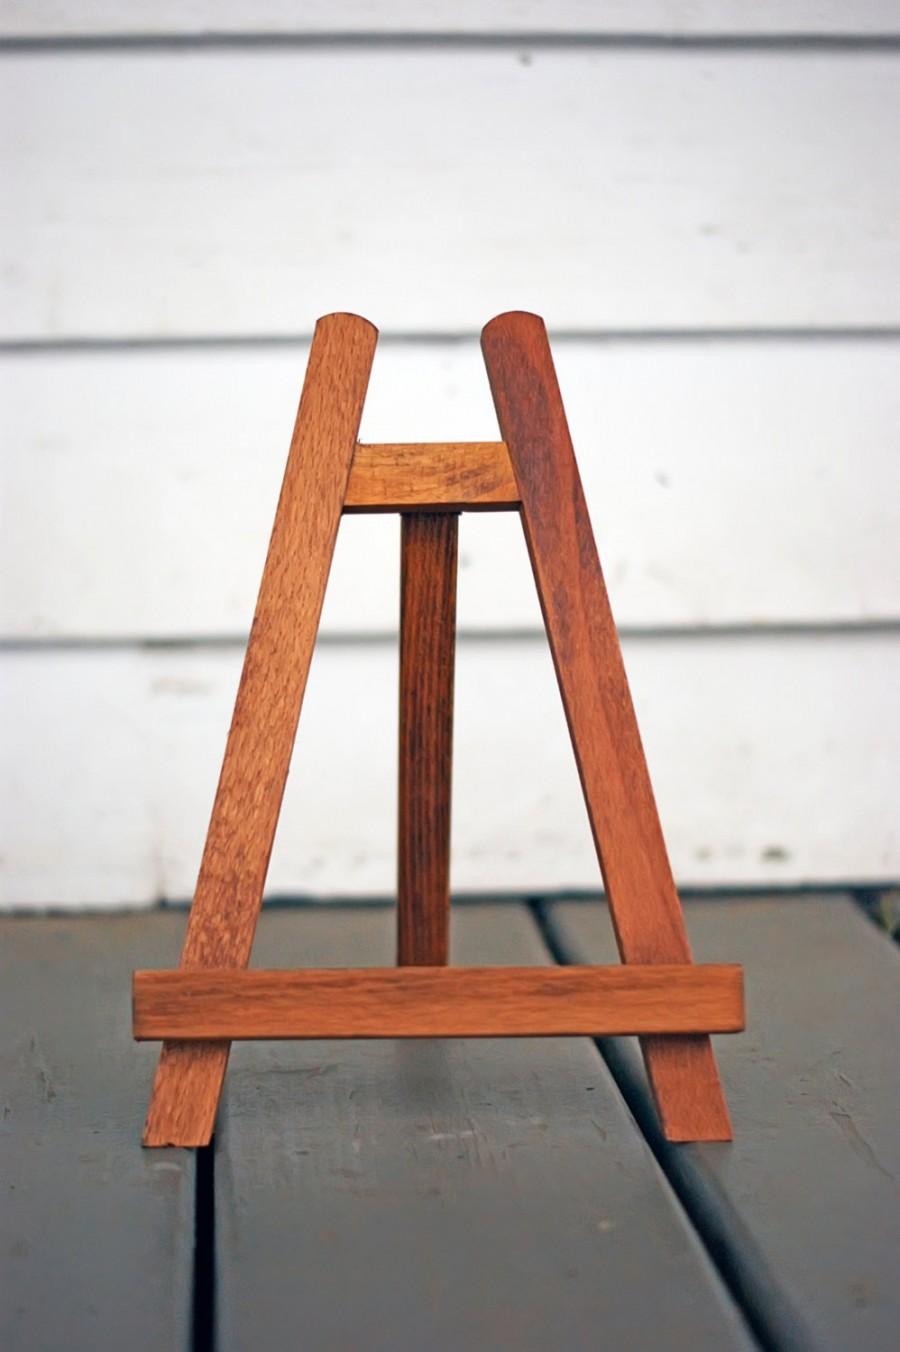 Mariage - Easel - Chalkboard Easel - Picture Easel - Wooden Easel - Wood Easel - Table Top Easel - Chalkboard Stand, Picture Stand - Wood Stand